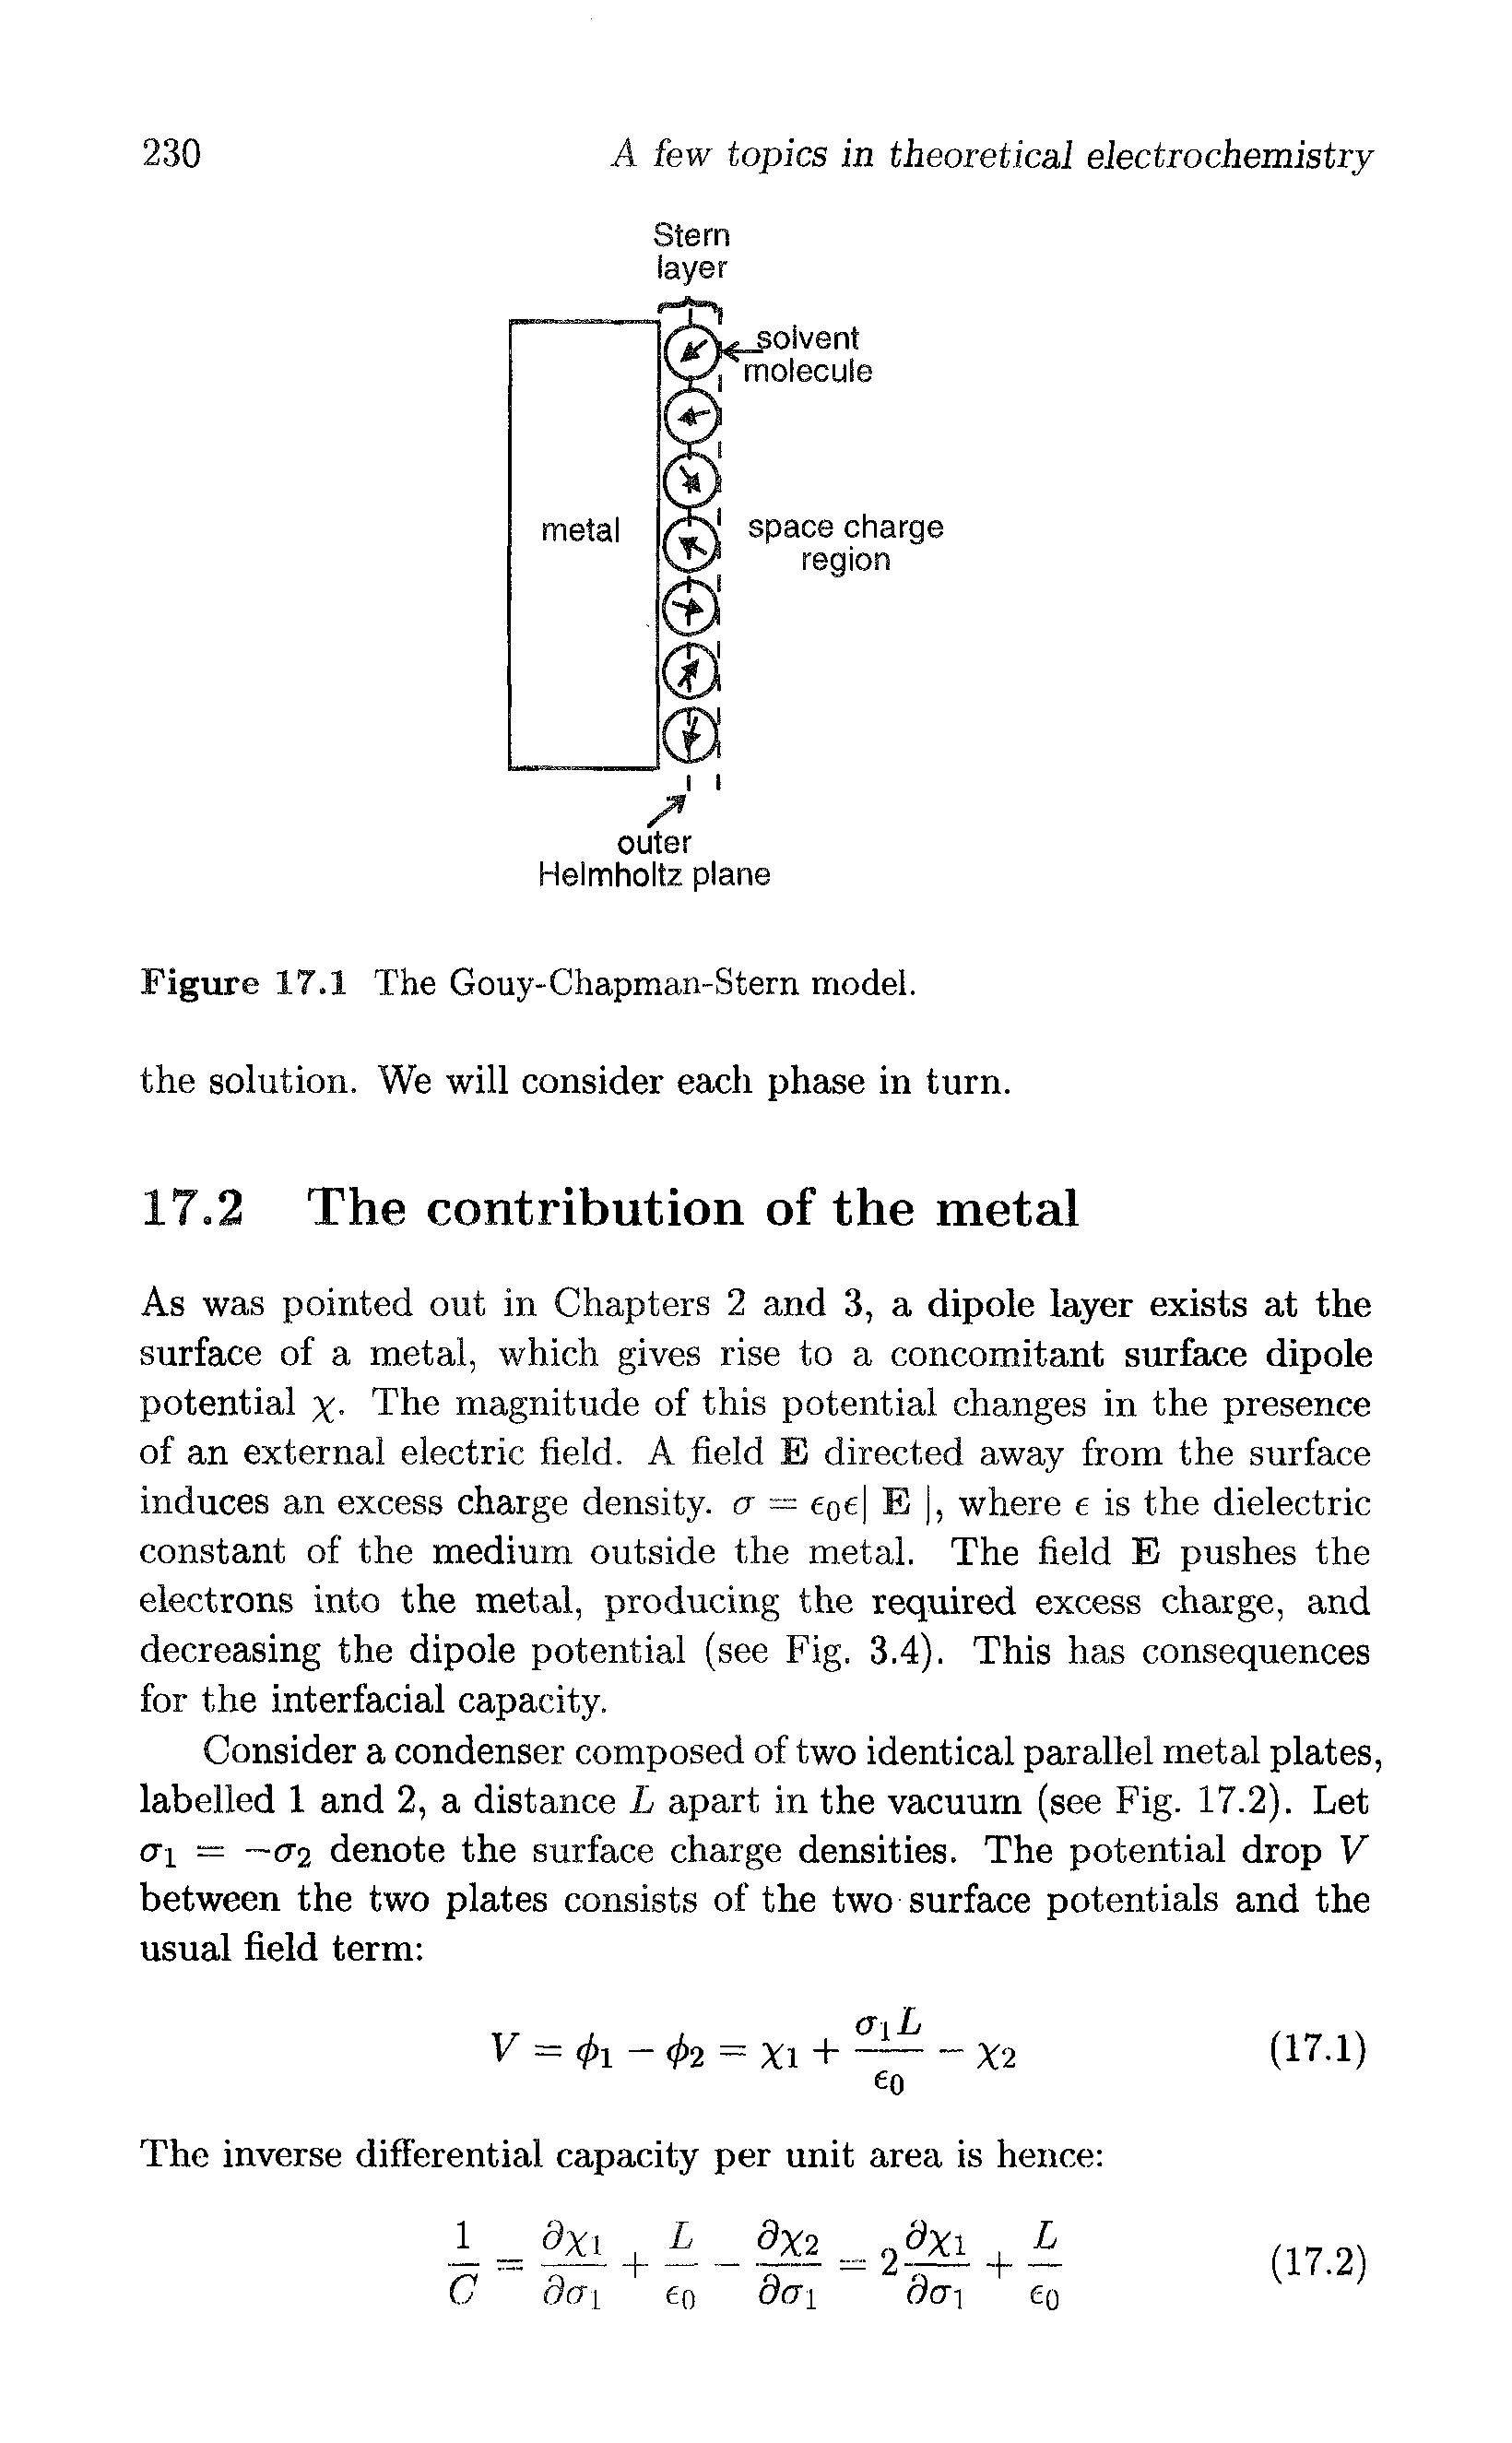 Figure 17.1 The Gouy-Chapman-Stern model, the solution. We will consider each phase in turn.